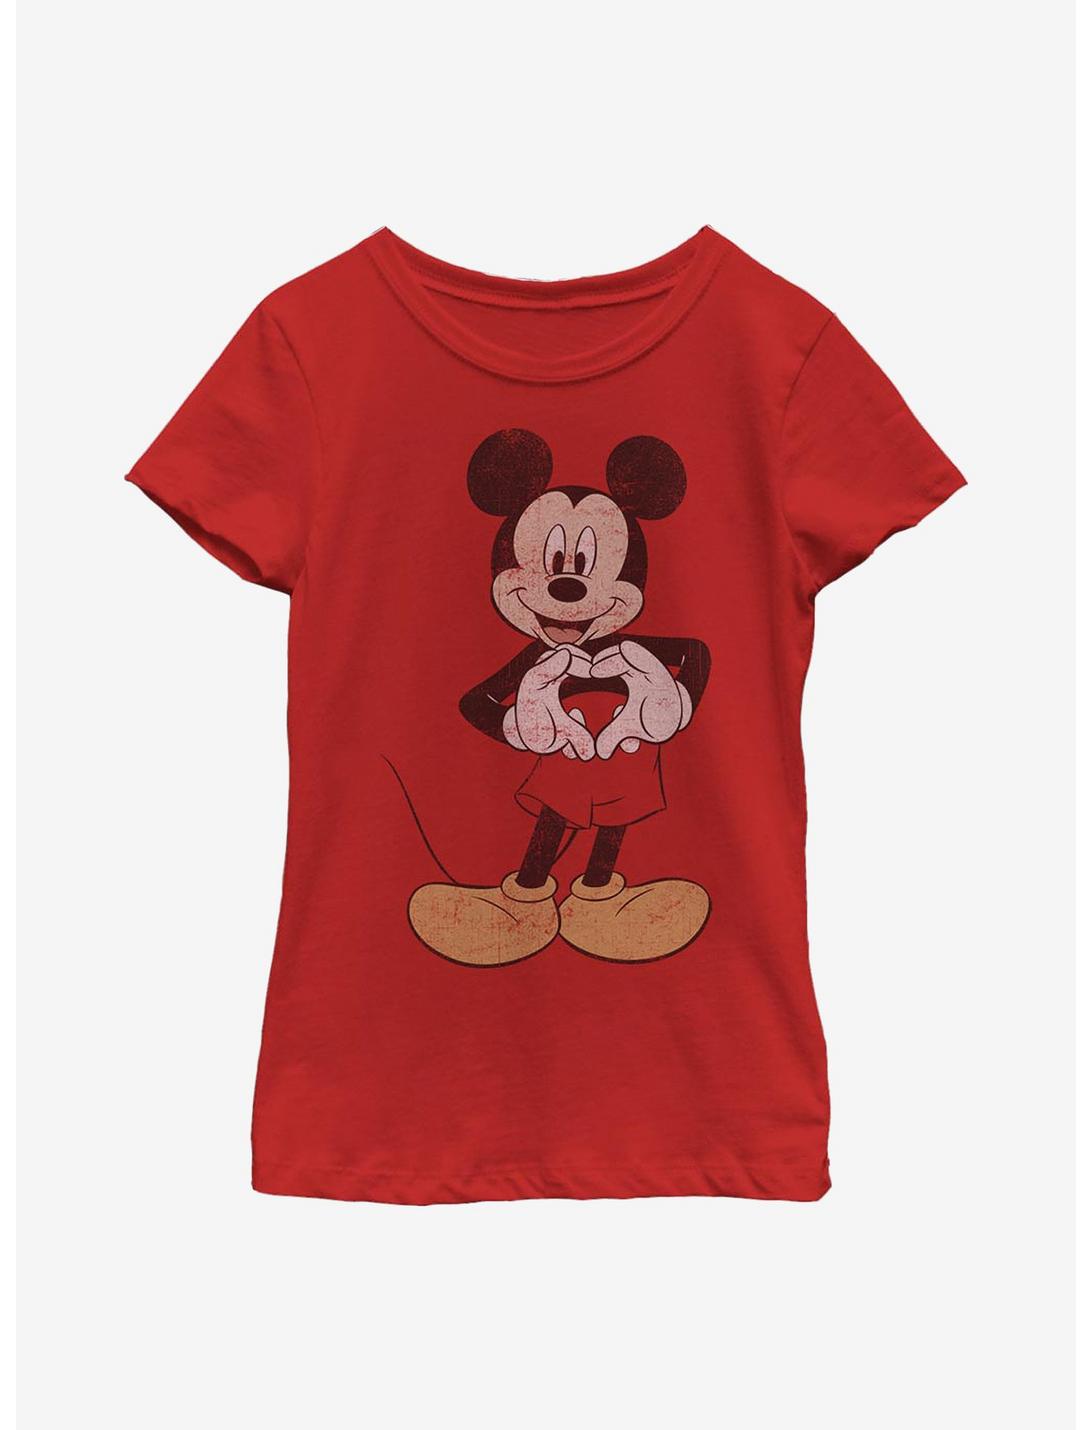 Disney Mickey Mouse Vintage Mickey Youth Girls T-Shirt, RED, hi-res